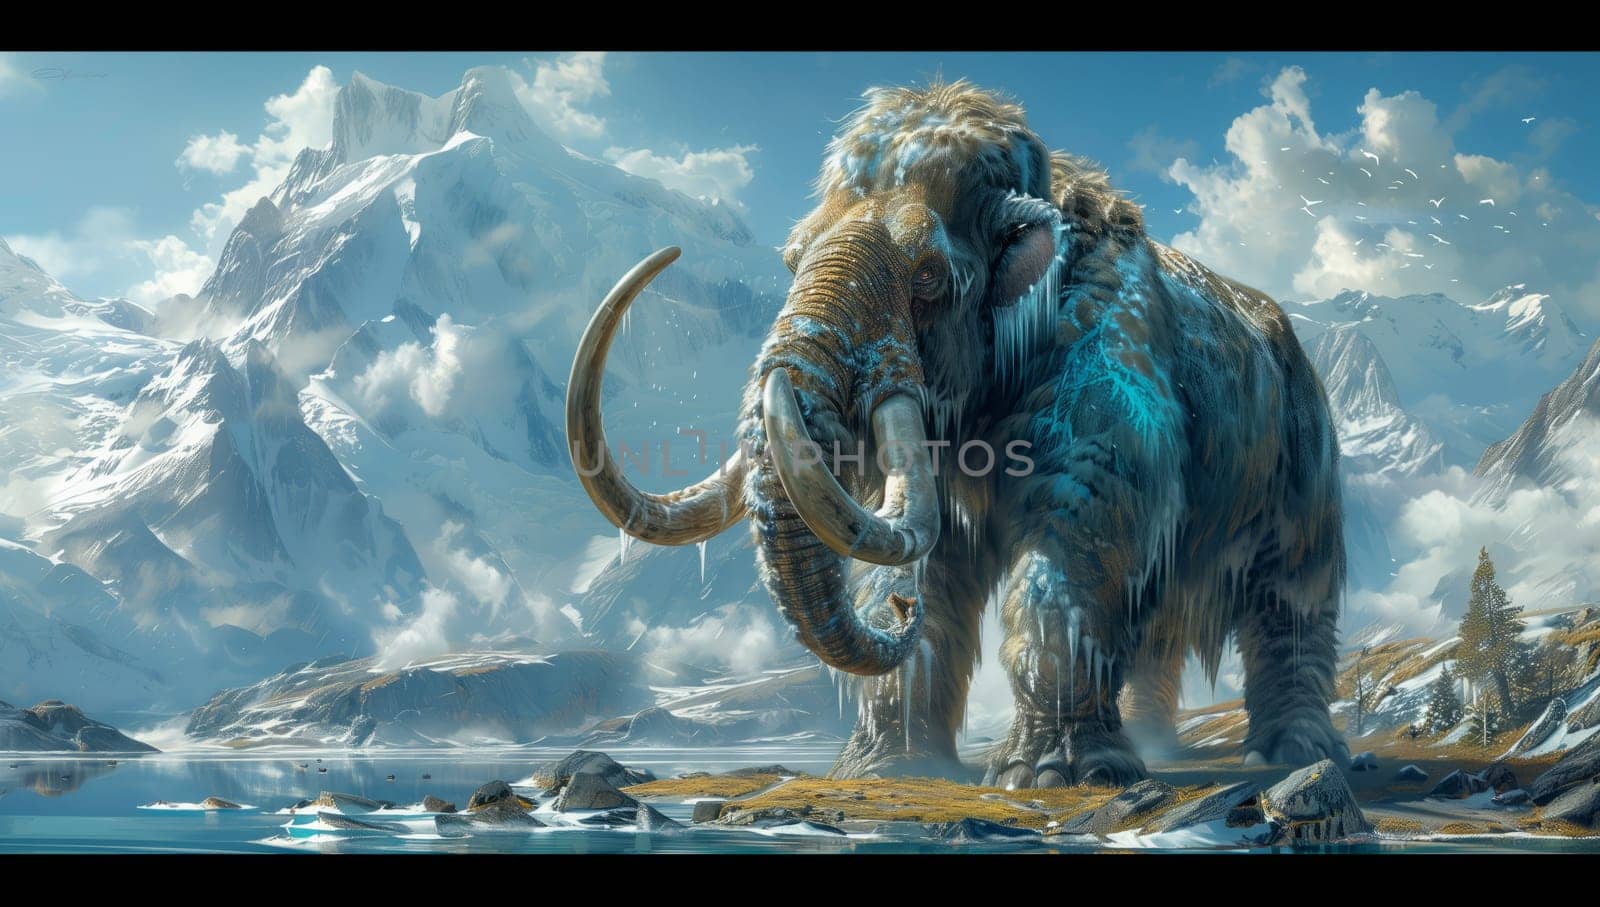 An illustration of a mammoth serving as a pack animal near a body of water in a dark jungle landscape, with clouds adding drama to the scene